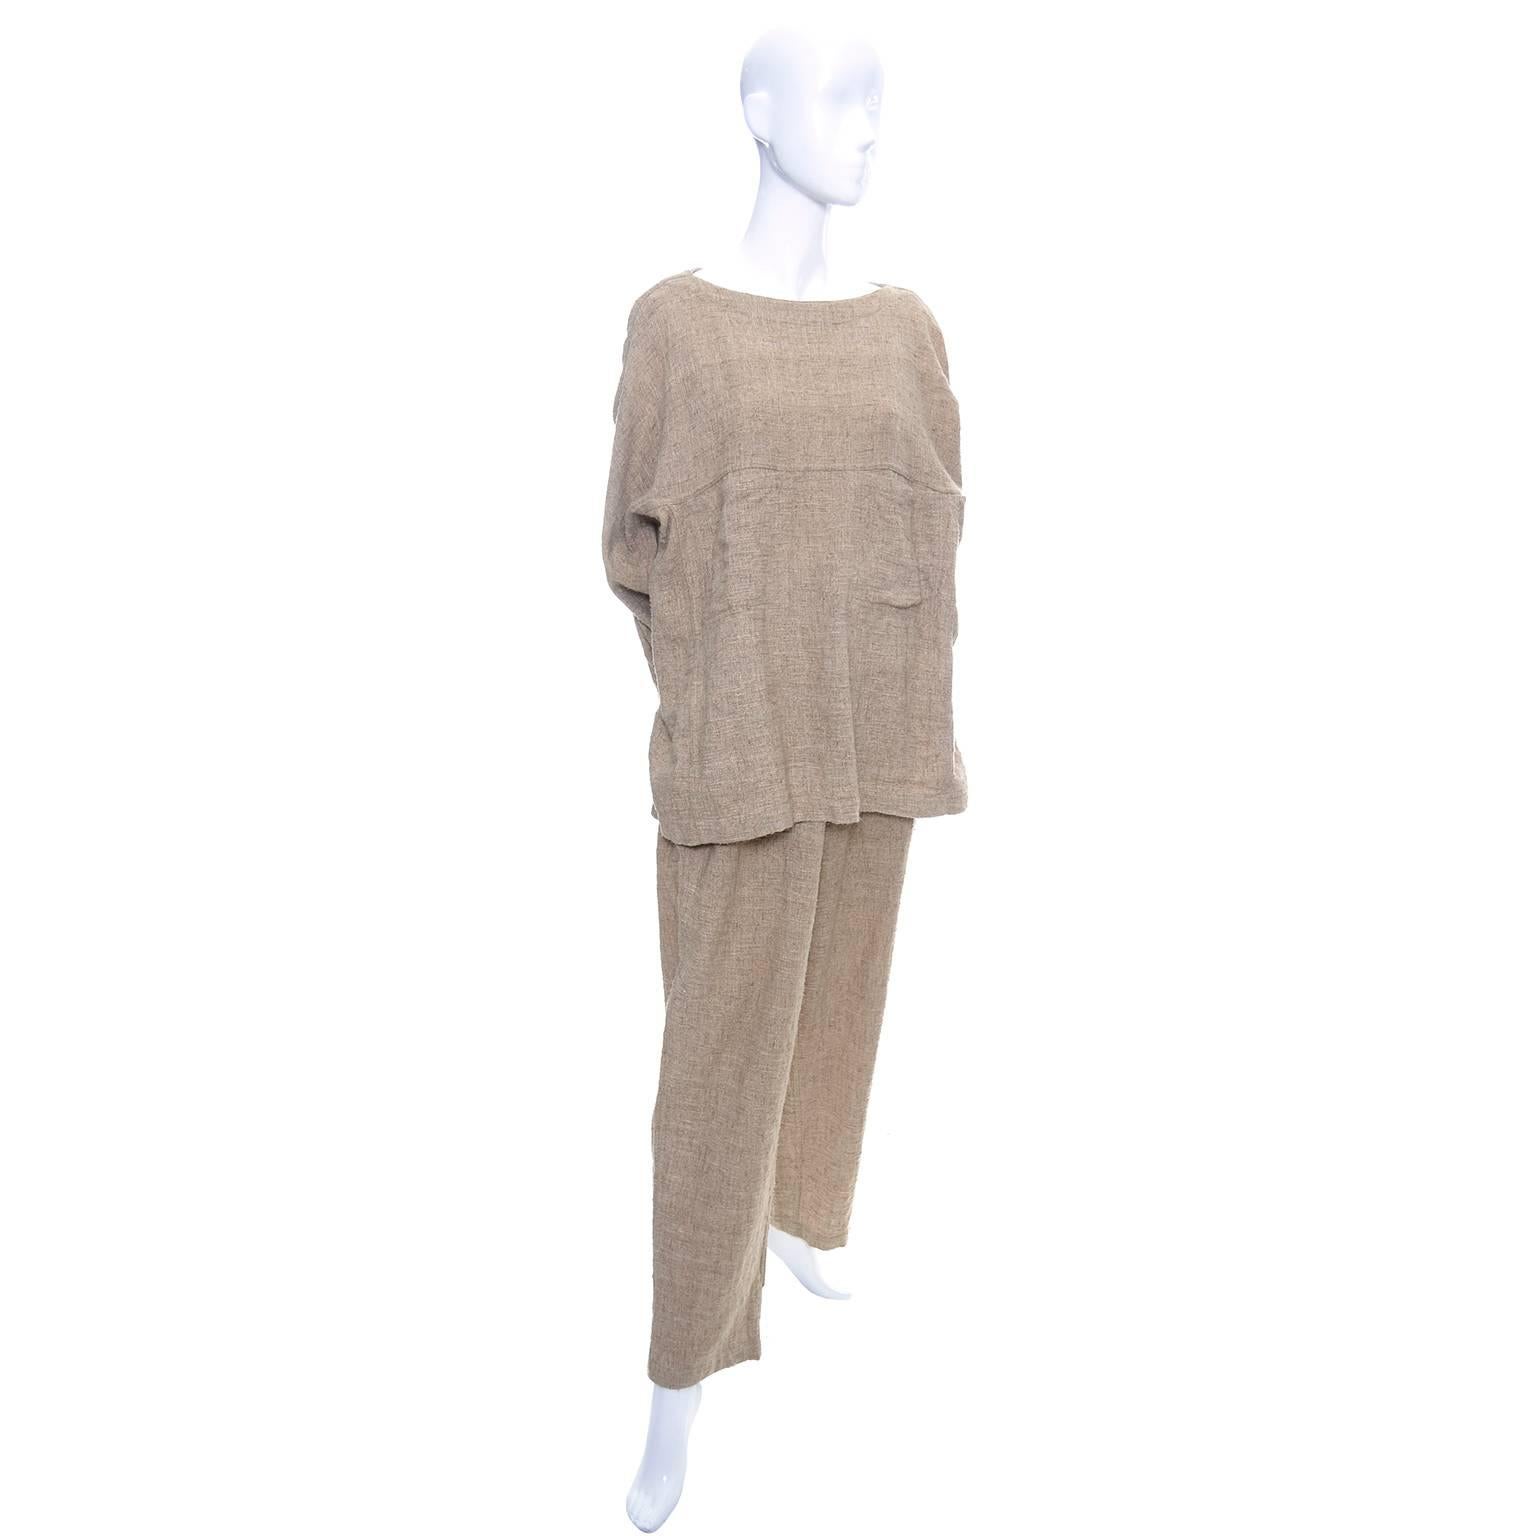 This 2 piece vintage outfit is from the Issey Miyake plantation line and is 100% cotton and was made in Hong Kong in the 1980's.  The textured cotton feels almost like a rough linen and the outfit has high waisted pants with elastic waistband and